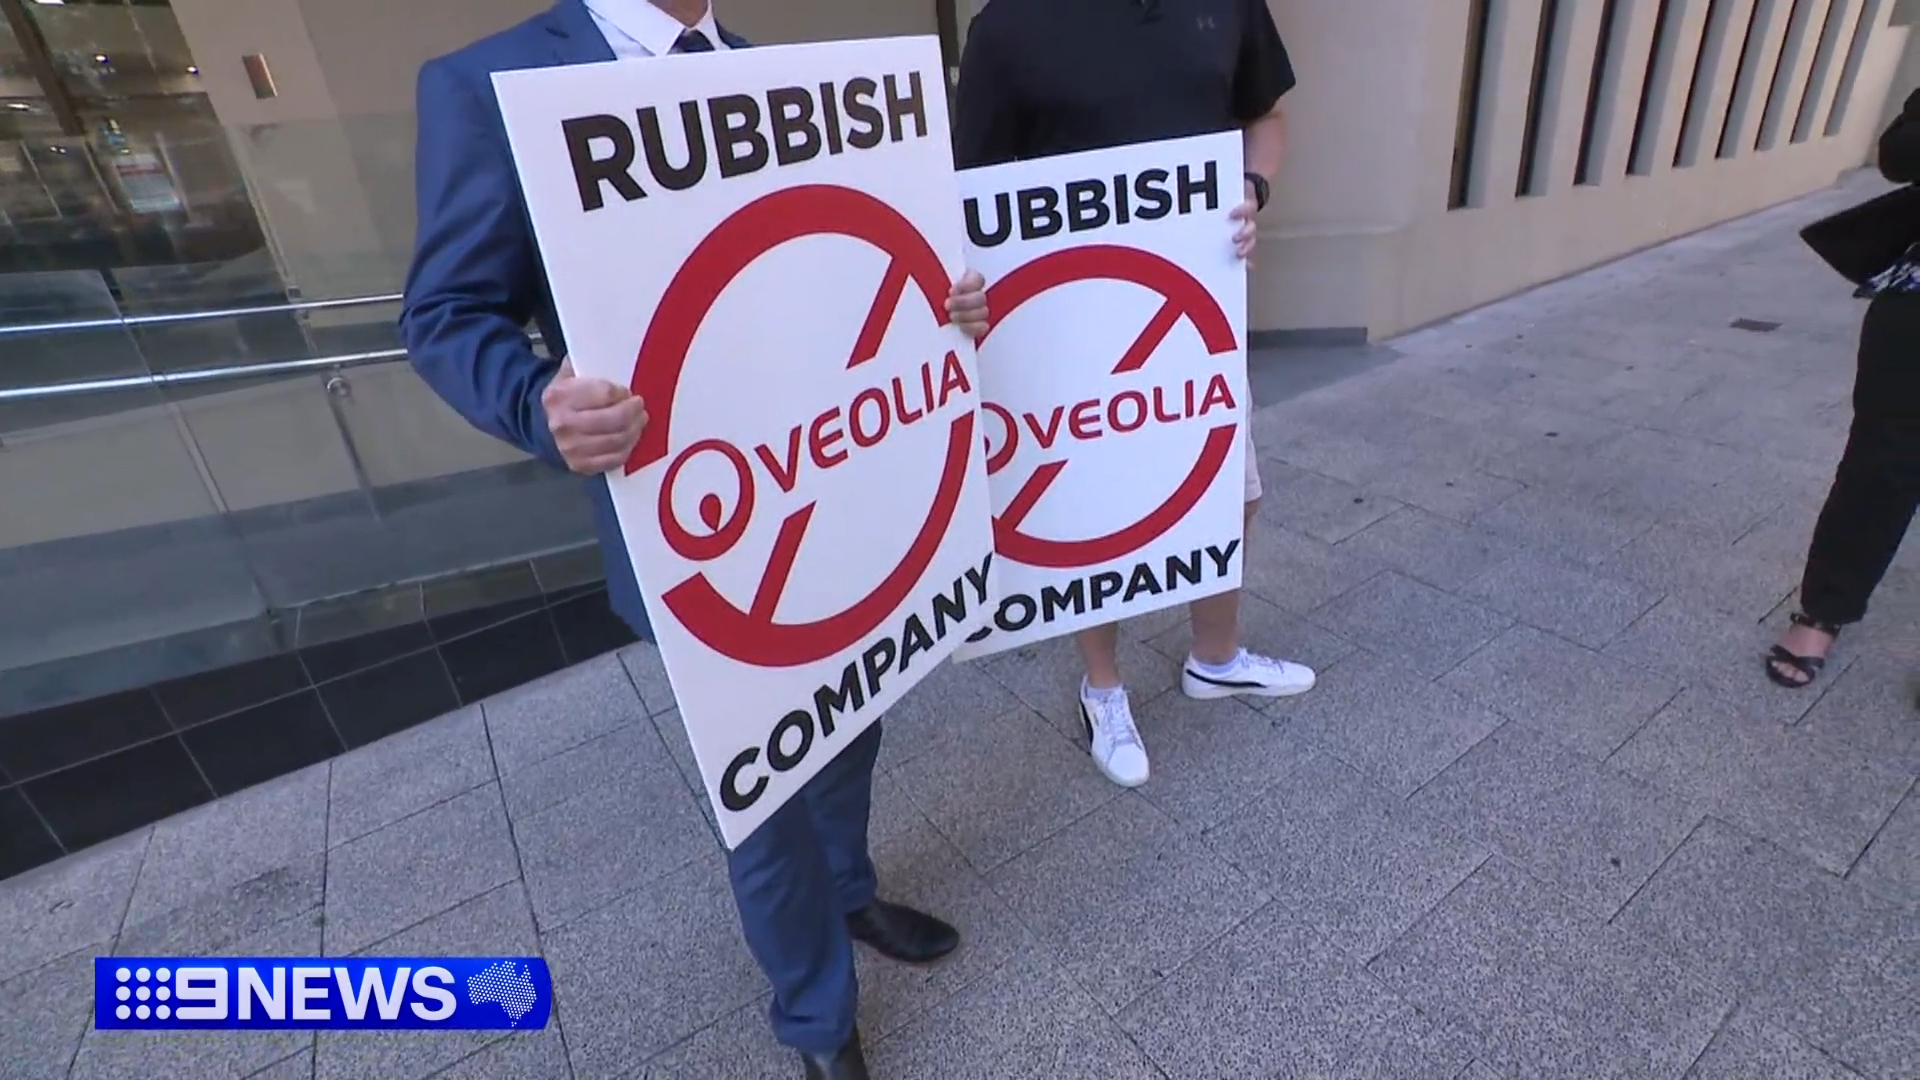 Jackson's dad, John Fogarty, is now considering legal action against the waste company Veolia